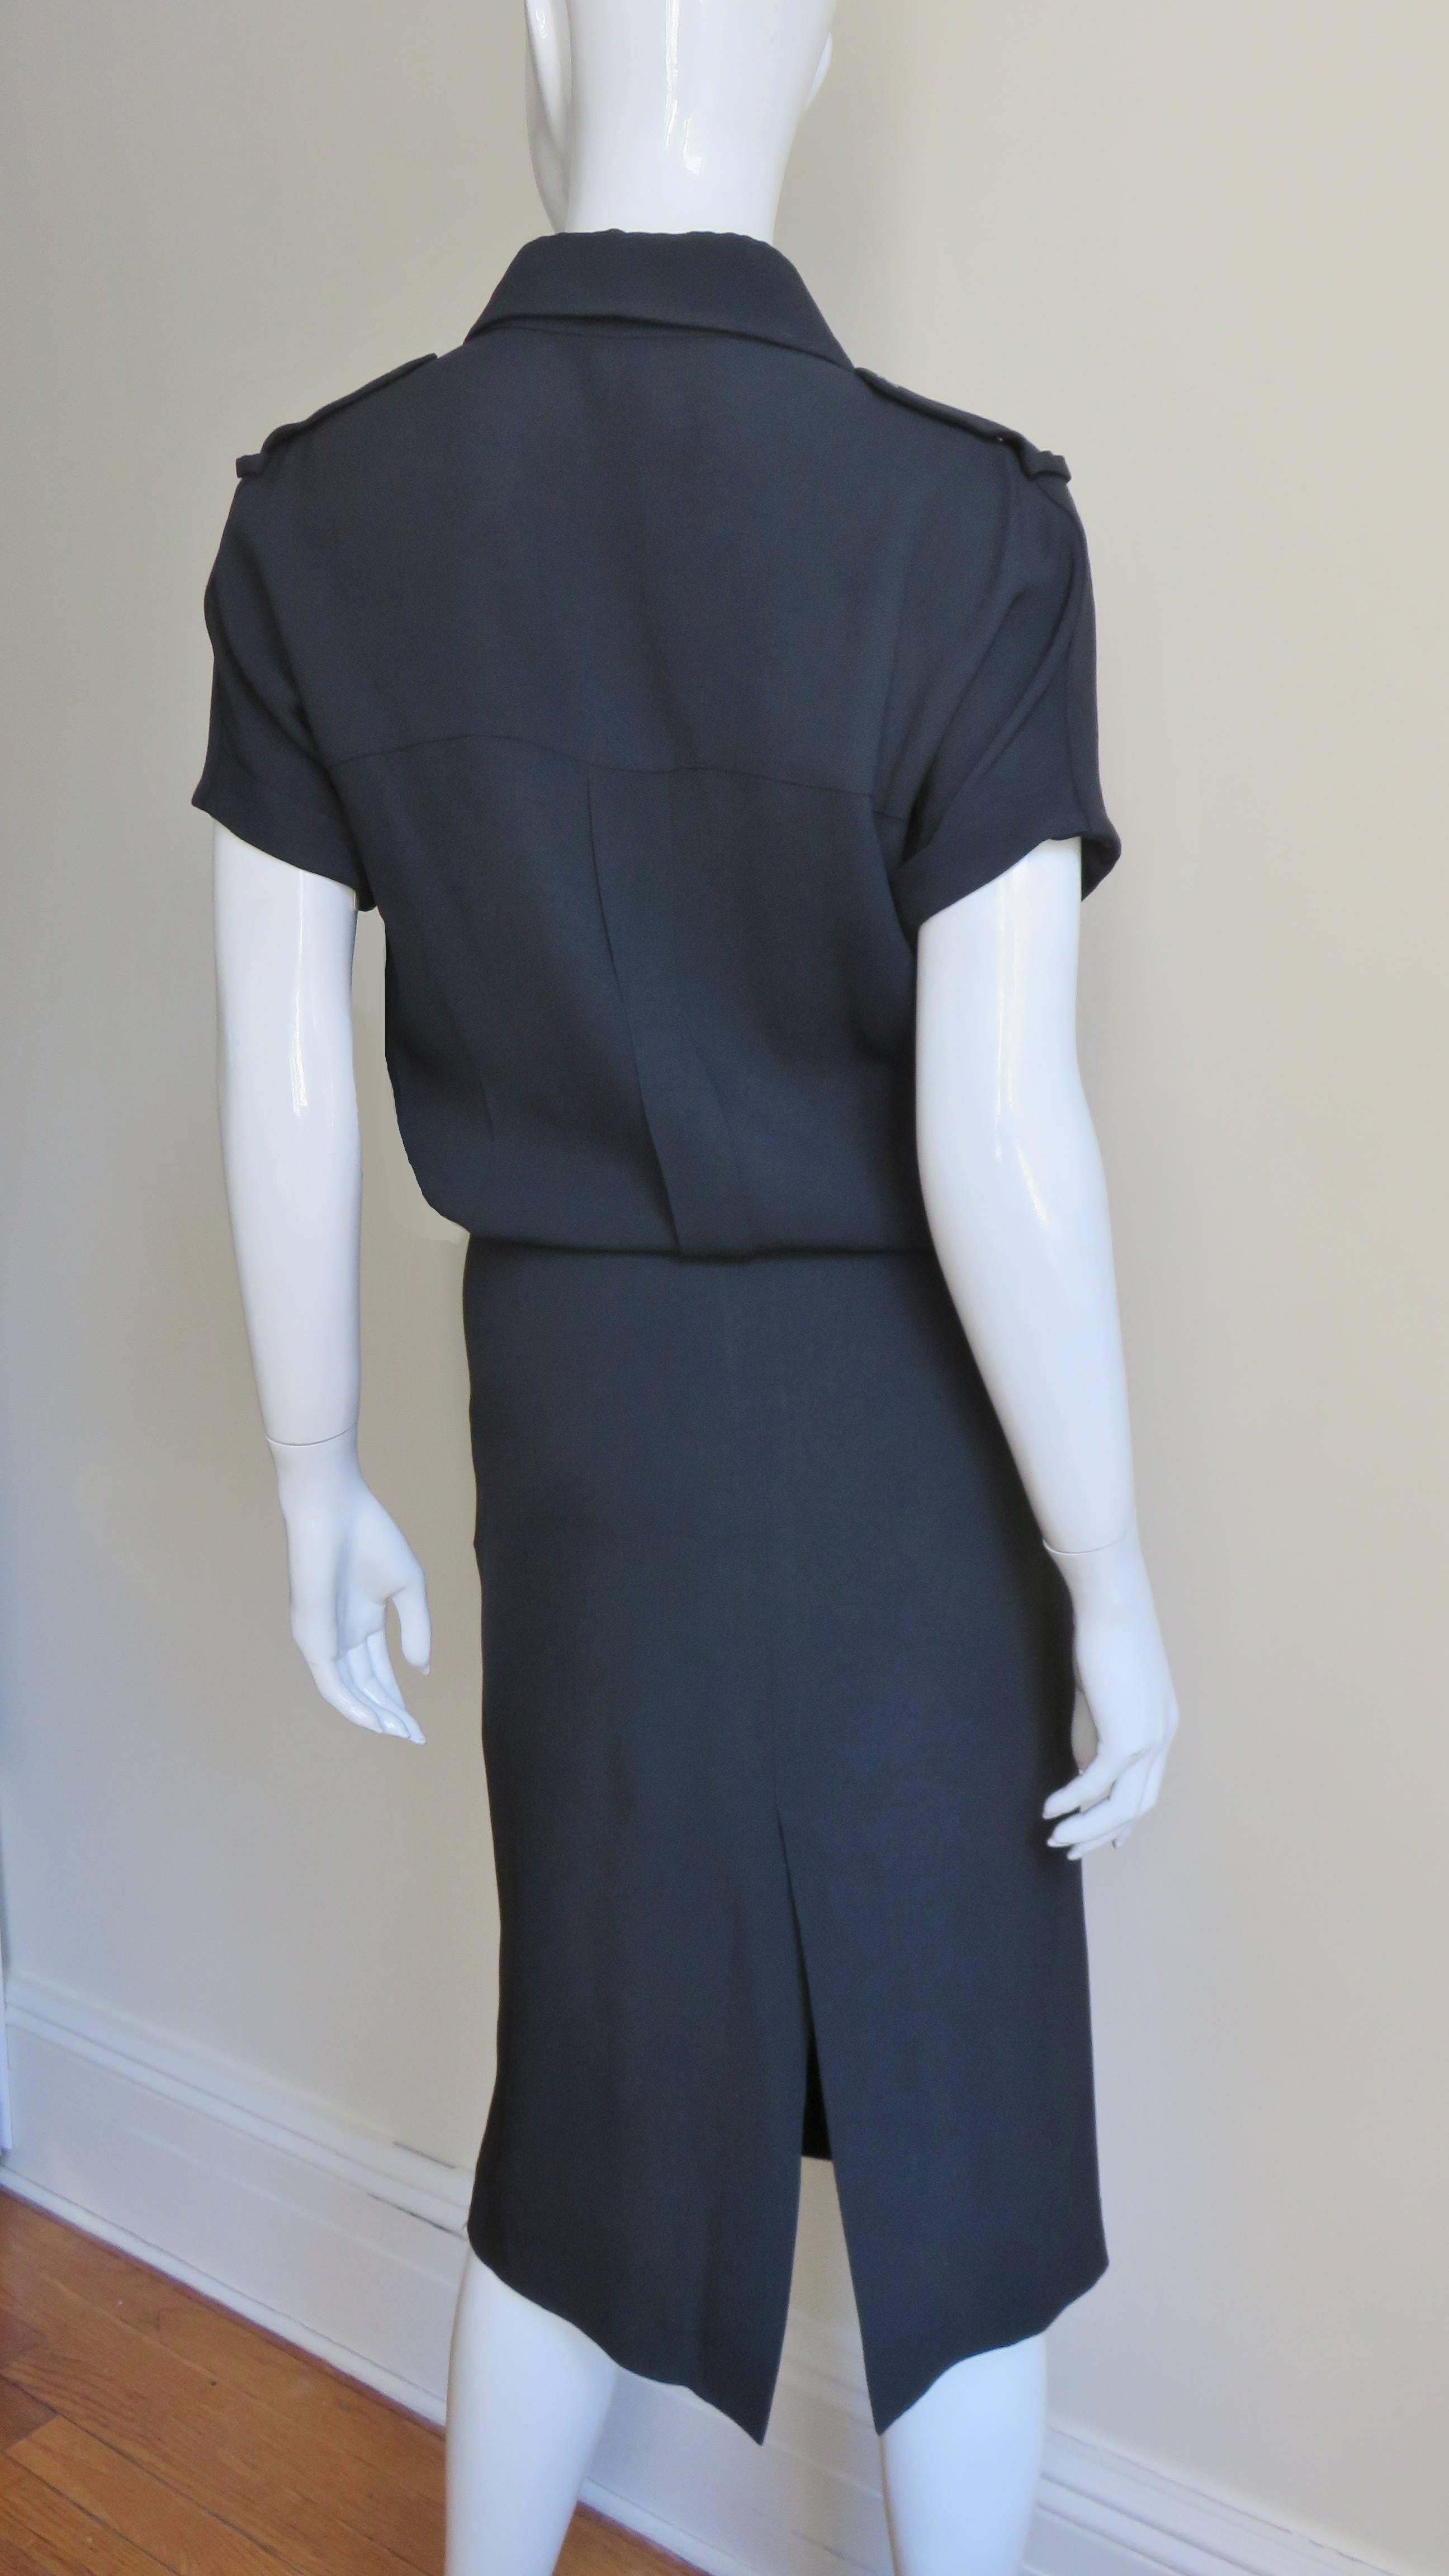 Alexander McQueen Chic Shirtwaist Dress In Good Condition For Sale In Water Mill, NY